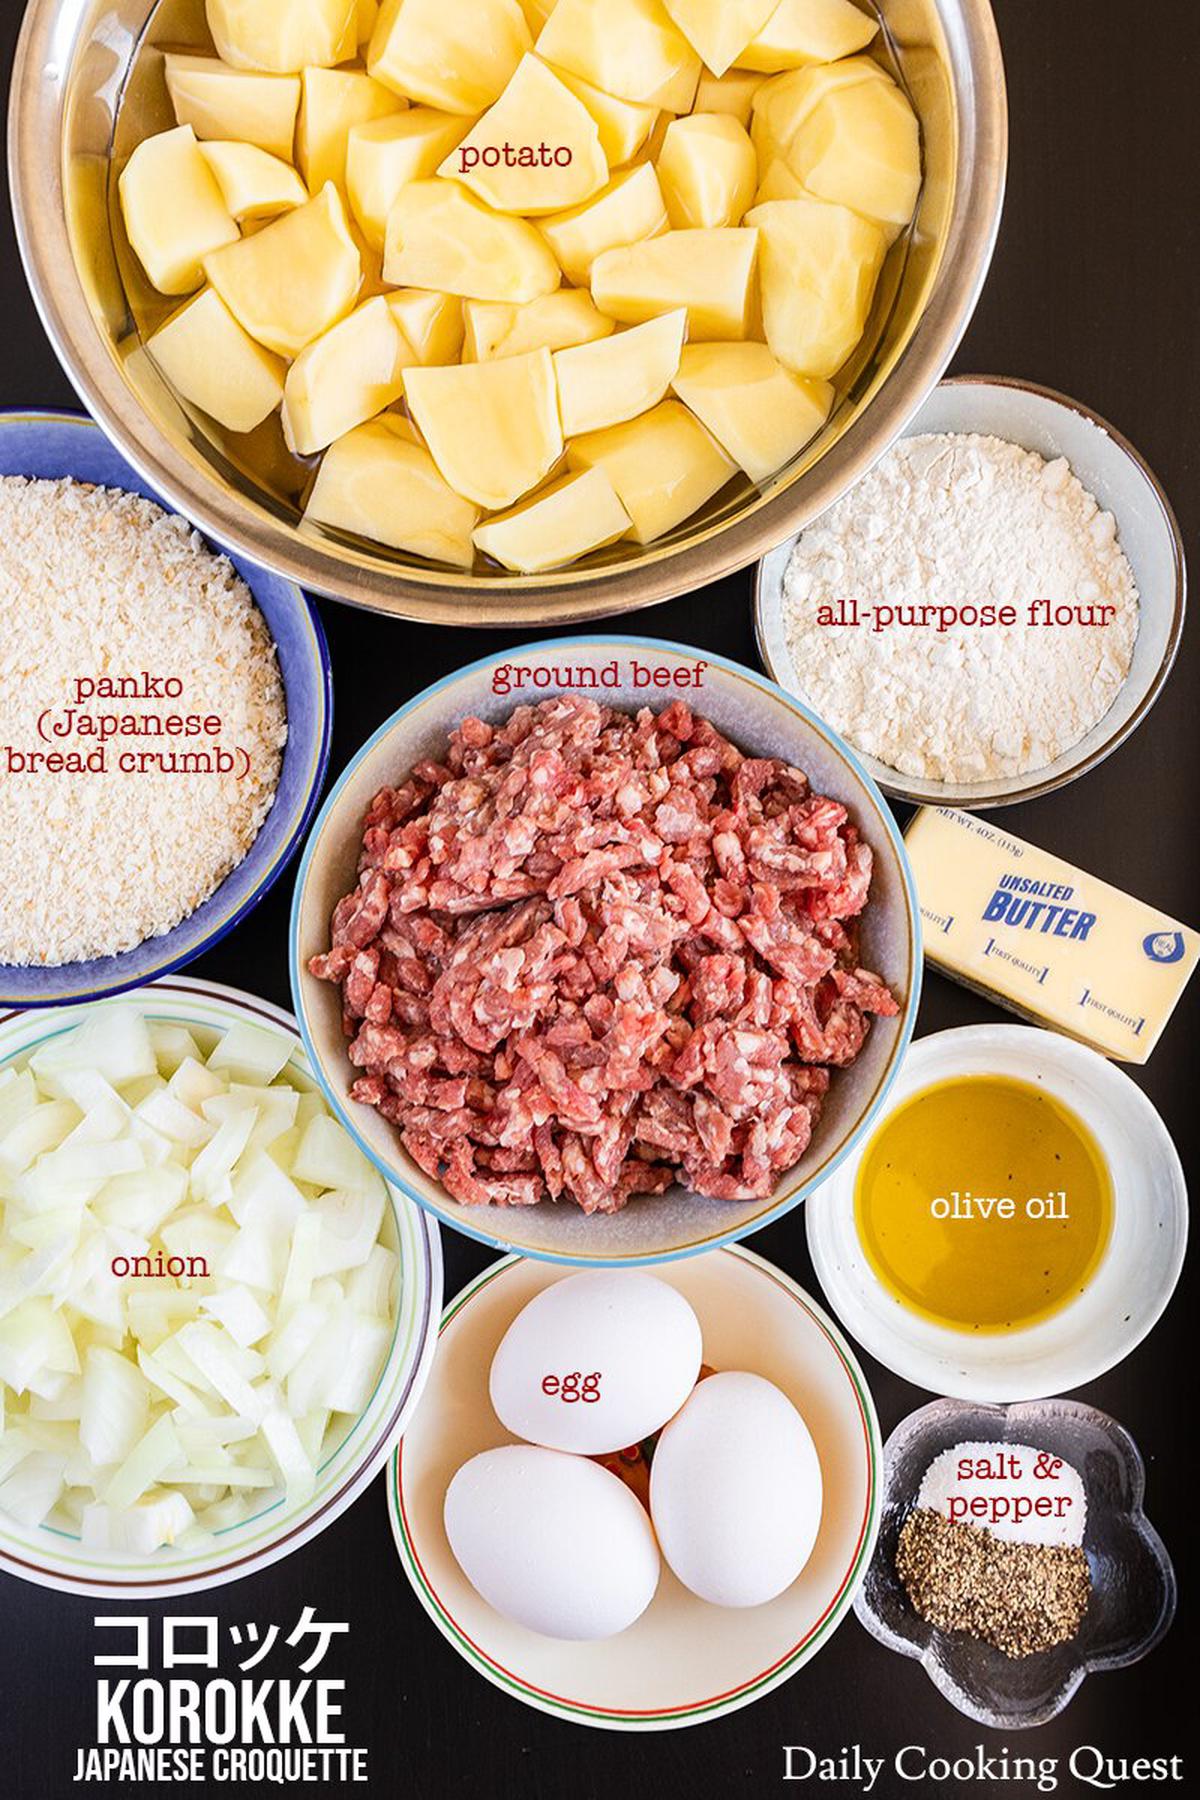 Ingredients to prepare korokke (Japanese croquette): potato, ground beef, onion, egg, butter, olive oil, all-purpose flour, panko (Japanese bread crumb), salt, and pepper.